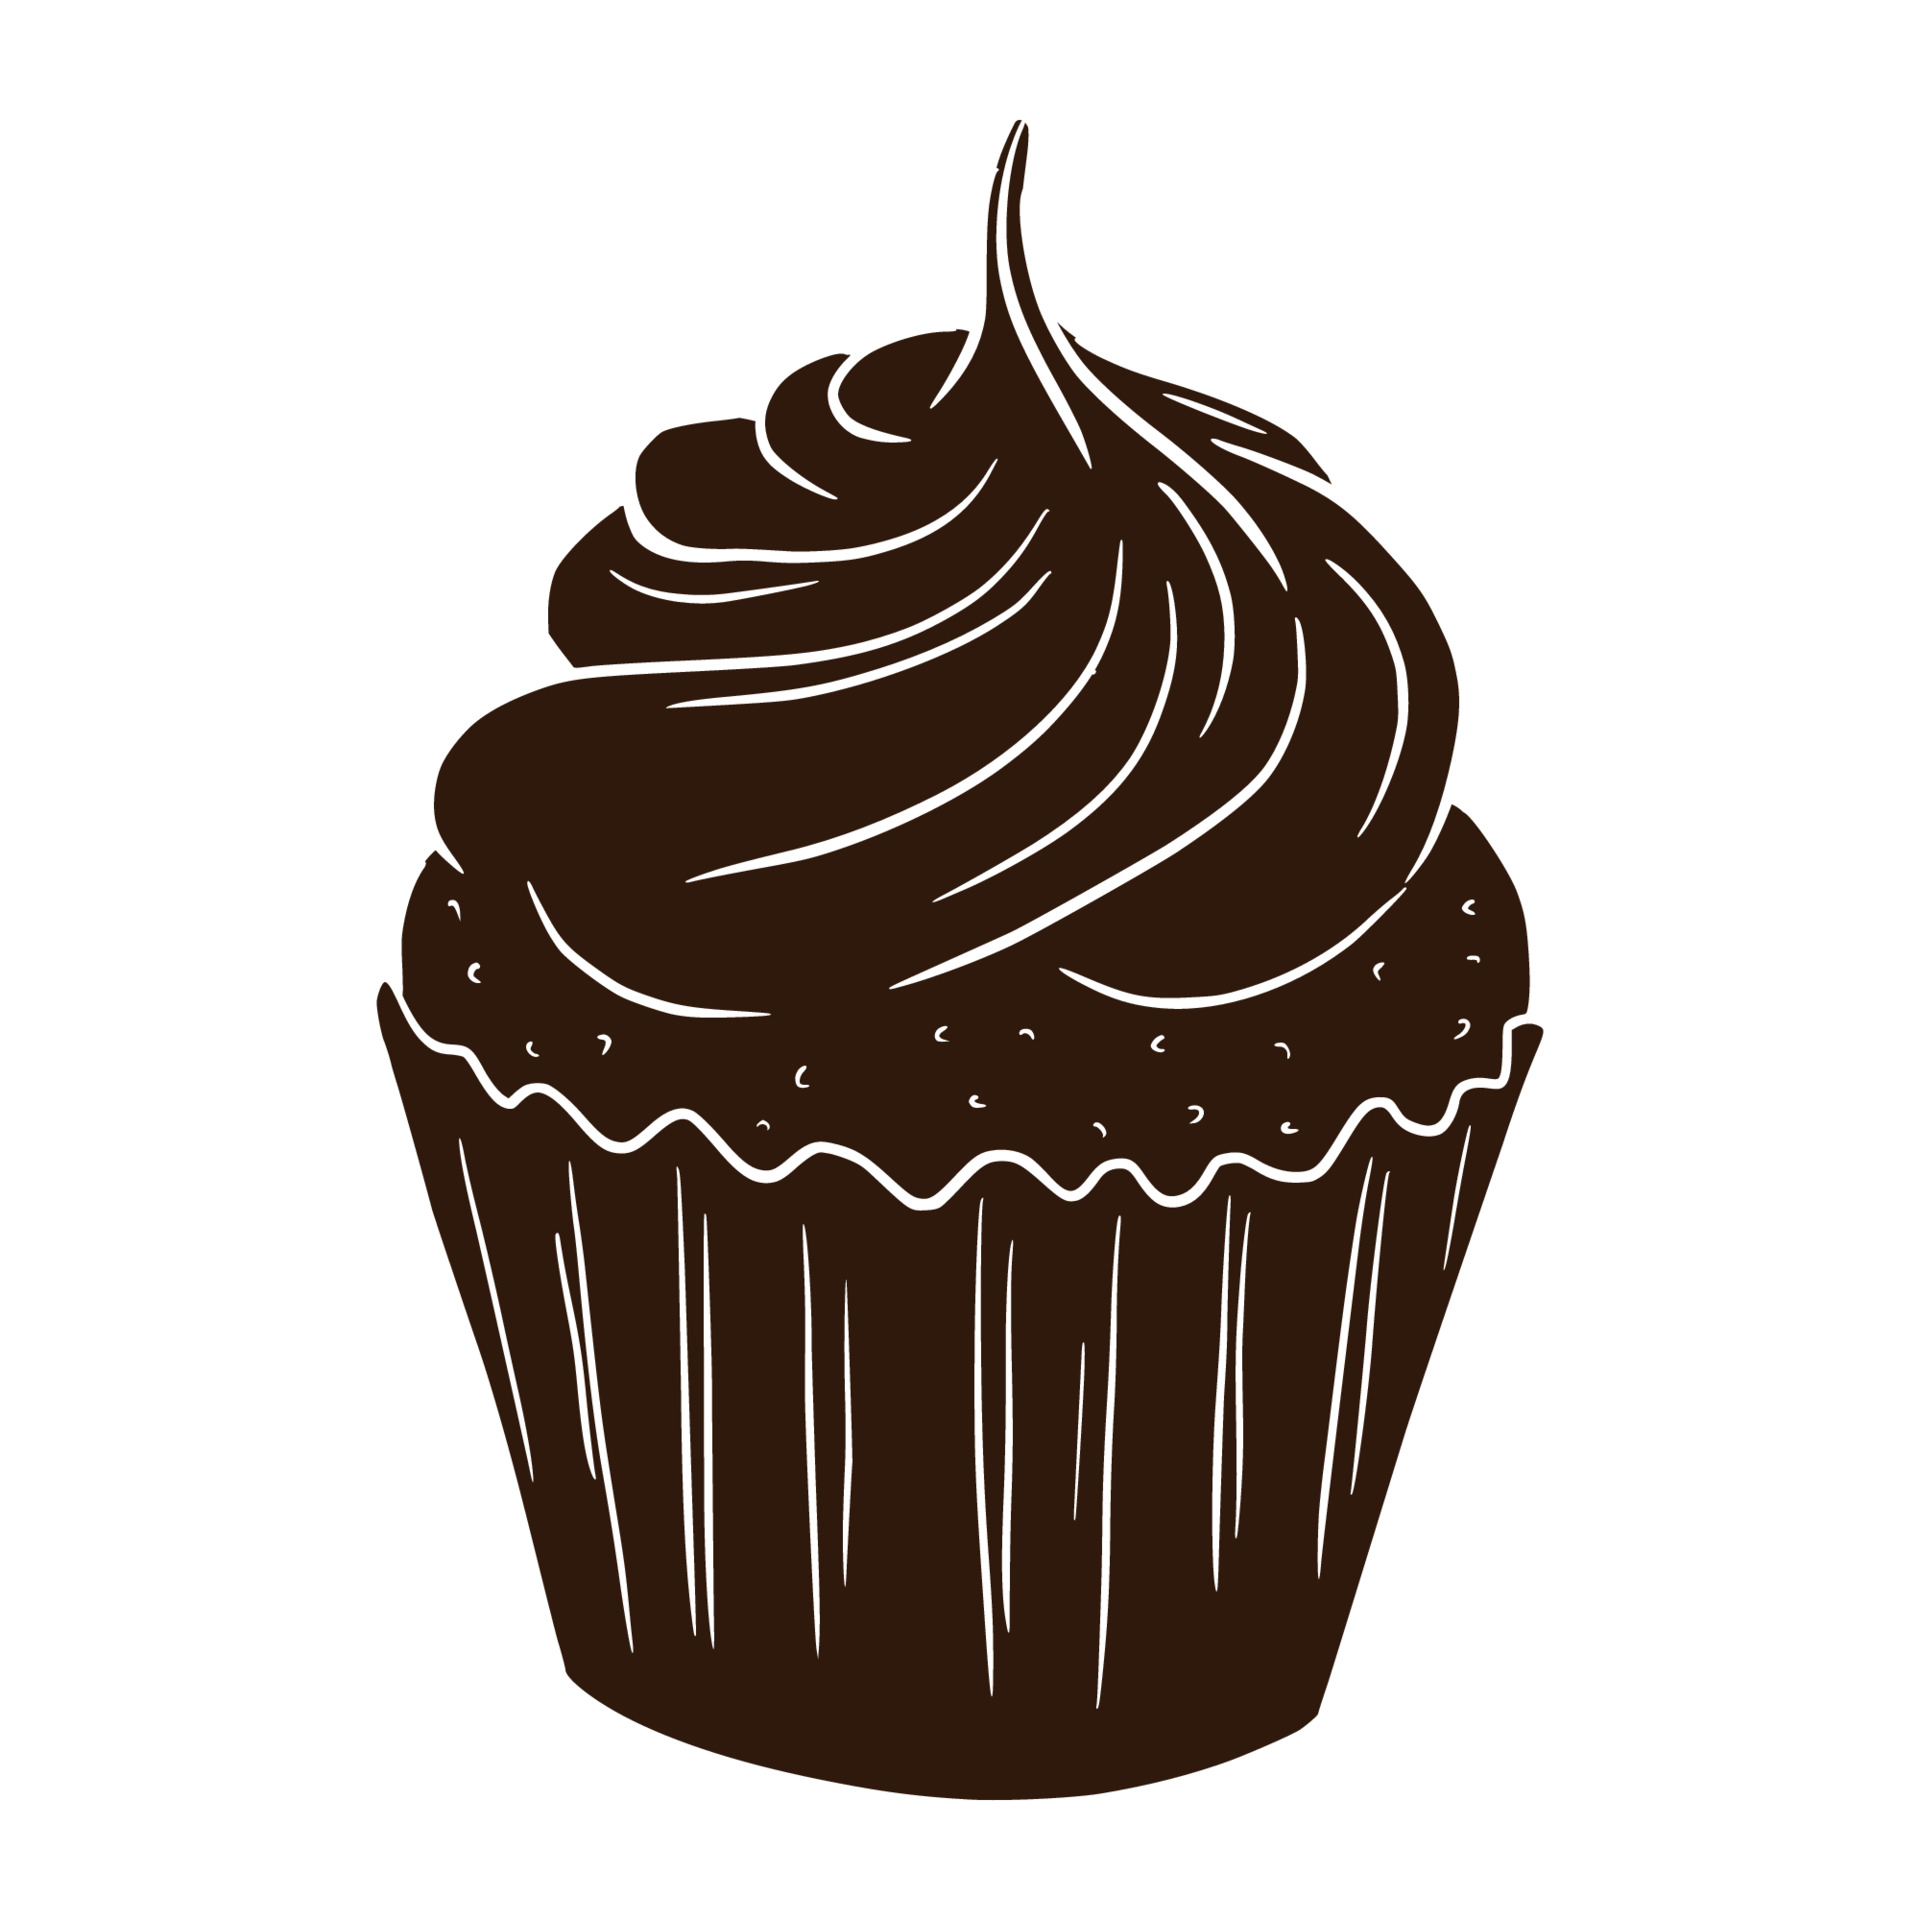 Two chocolate cupcakes or muffins with decoration Vector Image